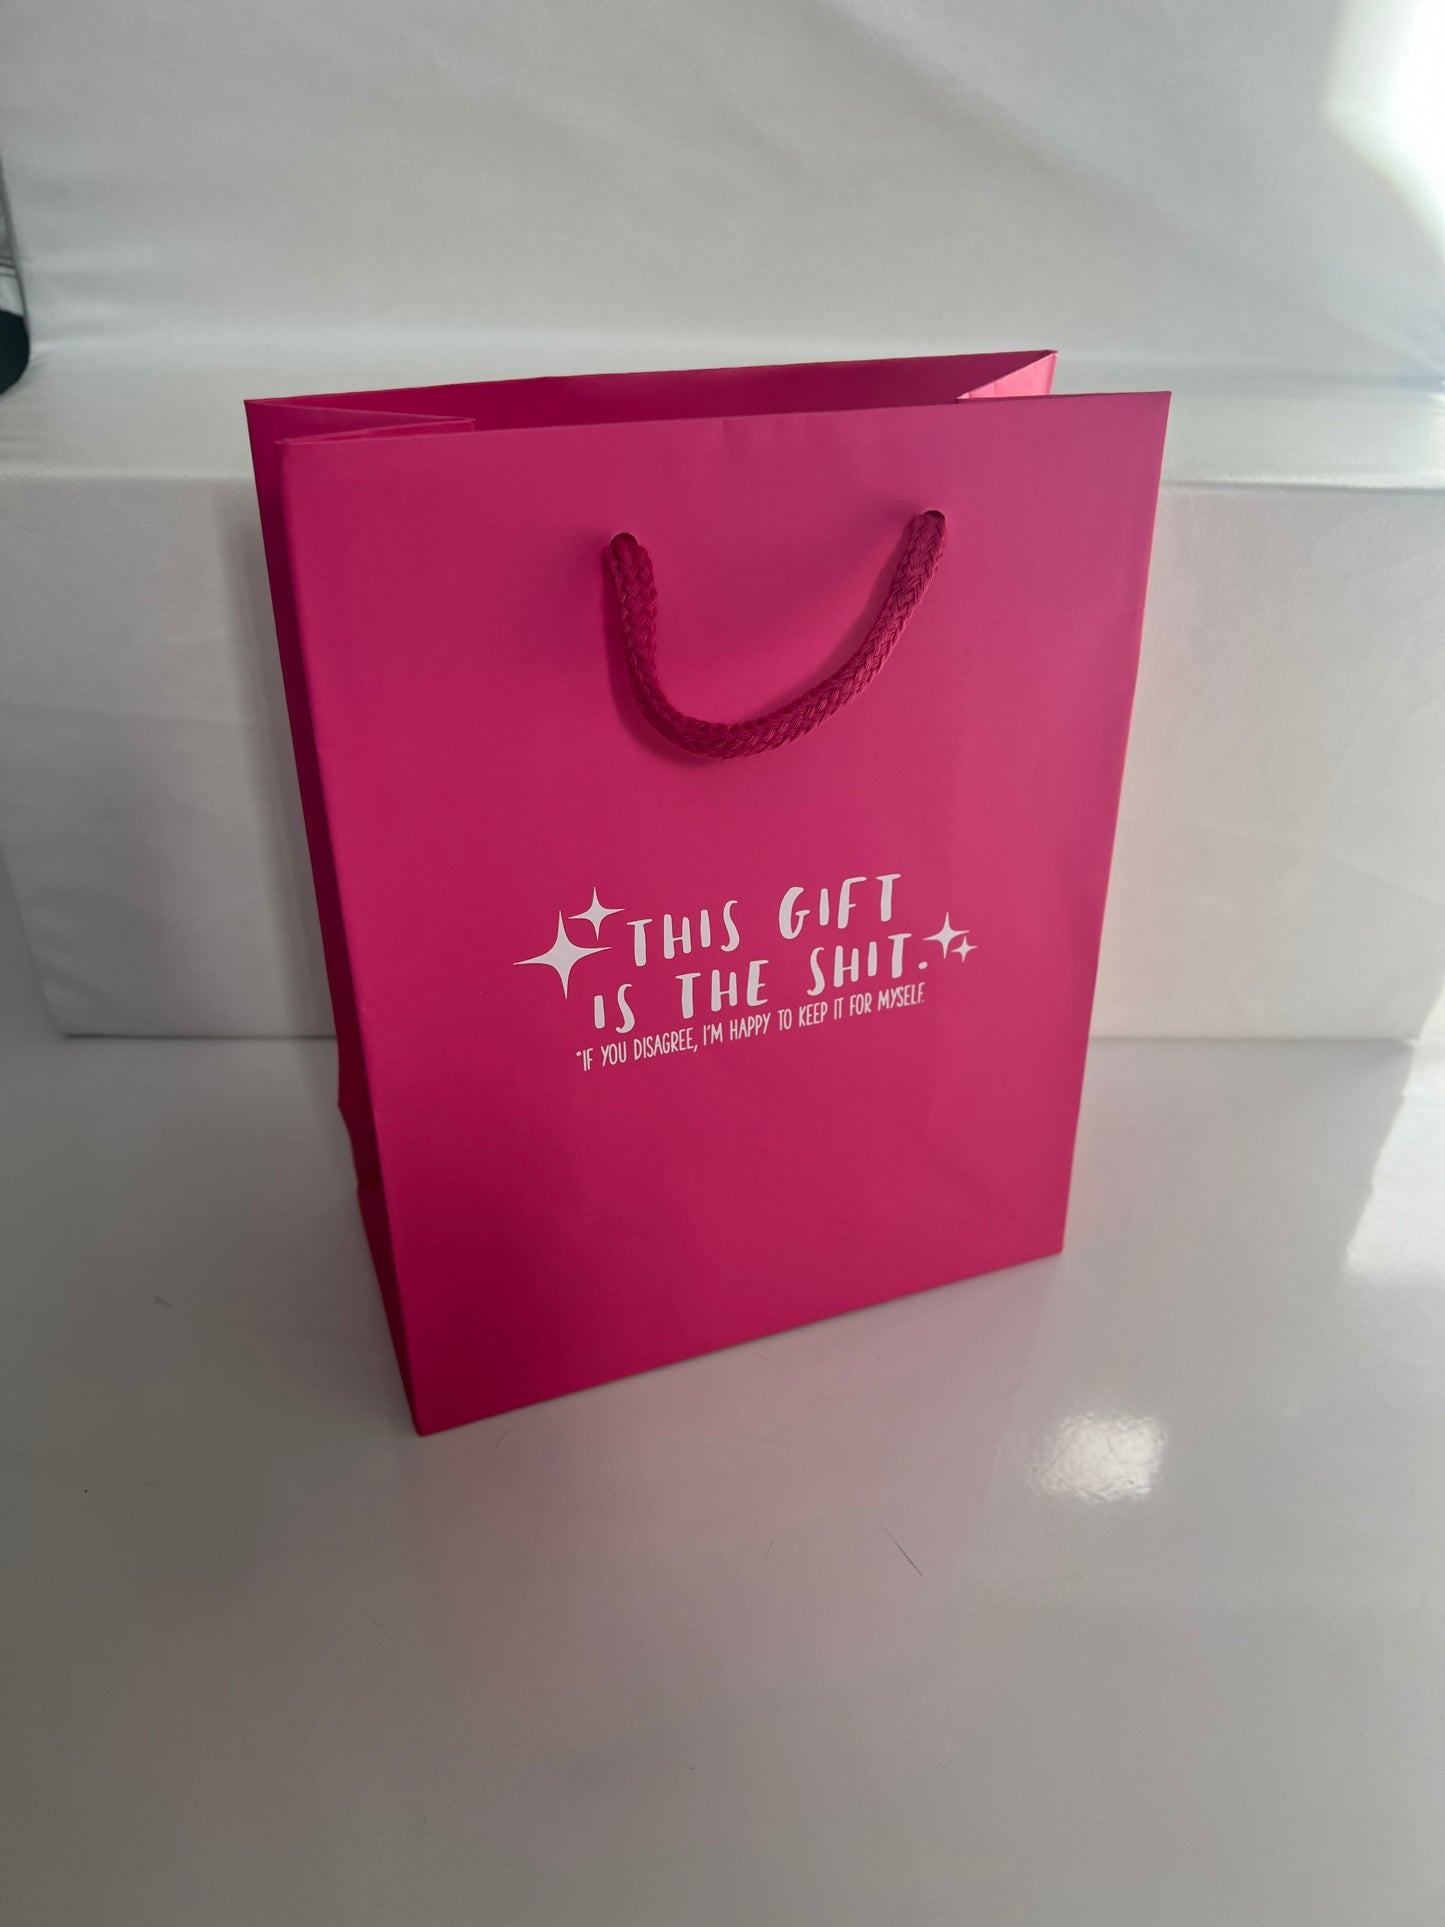 Gift Bag This Gift is the Shit—pink